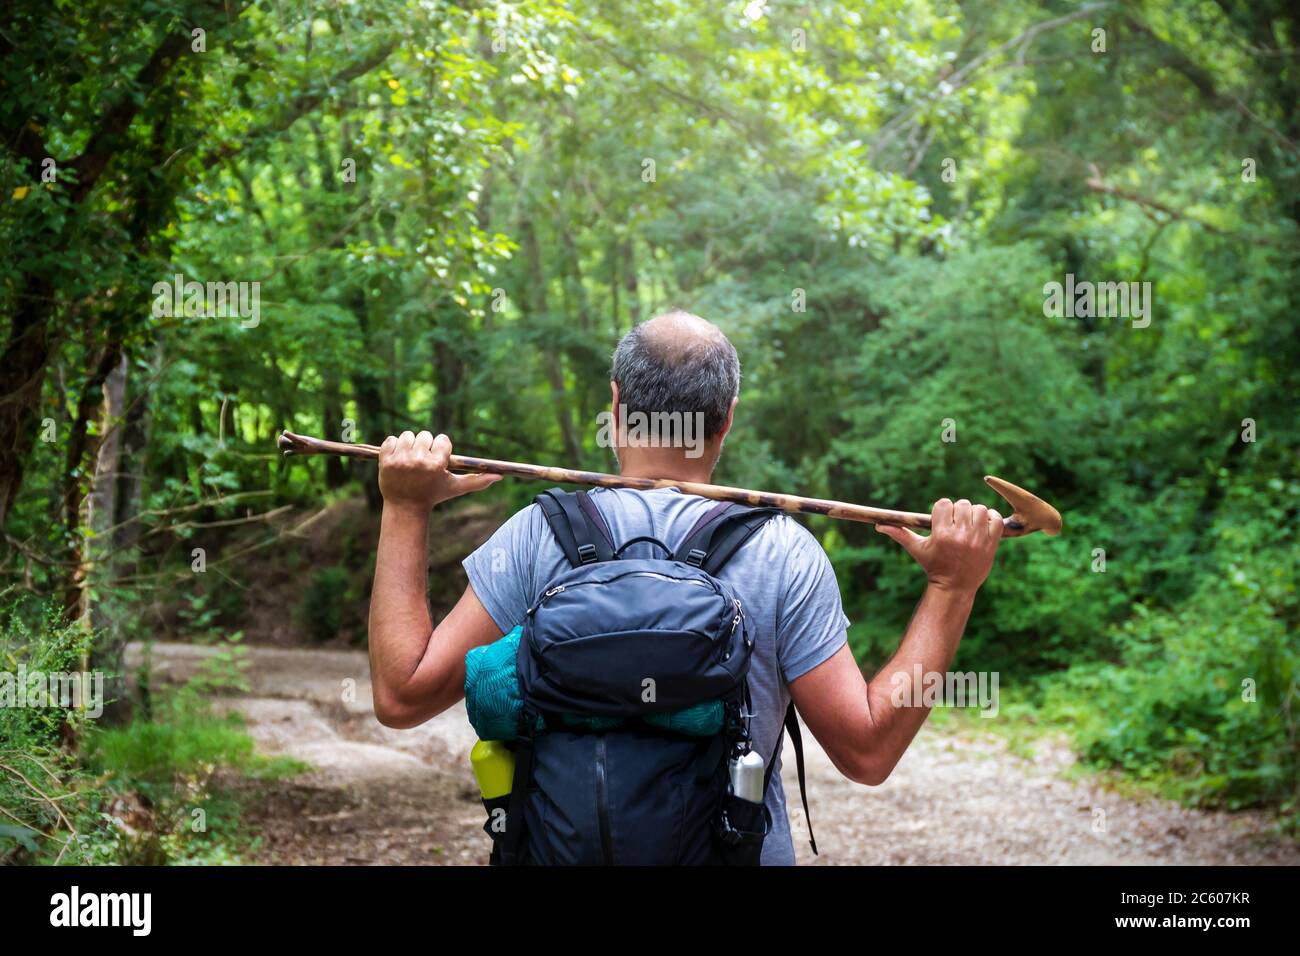 The man walks on the path in the woods, carrying his trekking stick on his shoulders. All around the rich surrounding vegetation with the green of Stock Photo